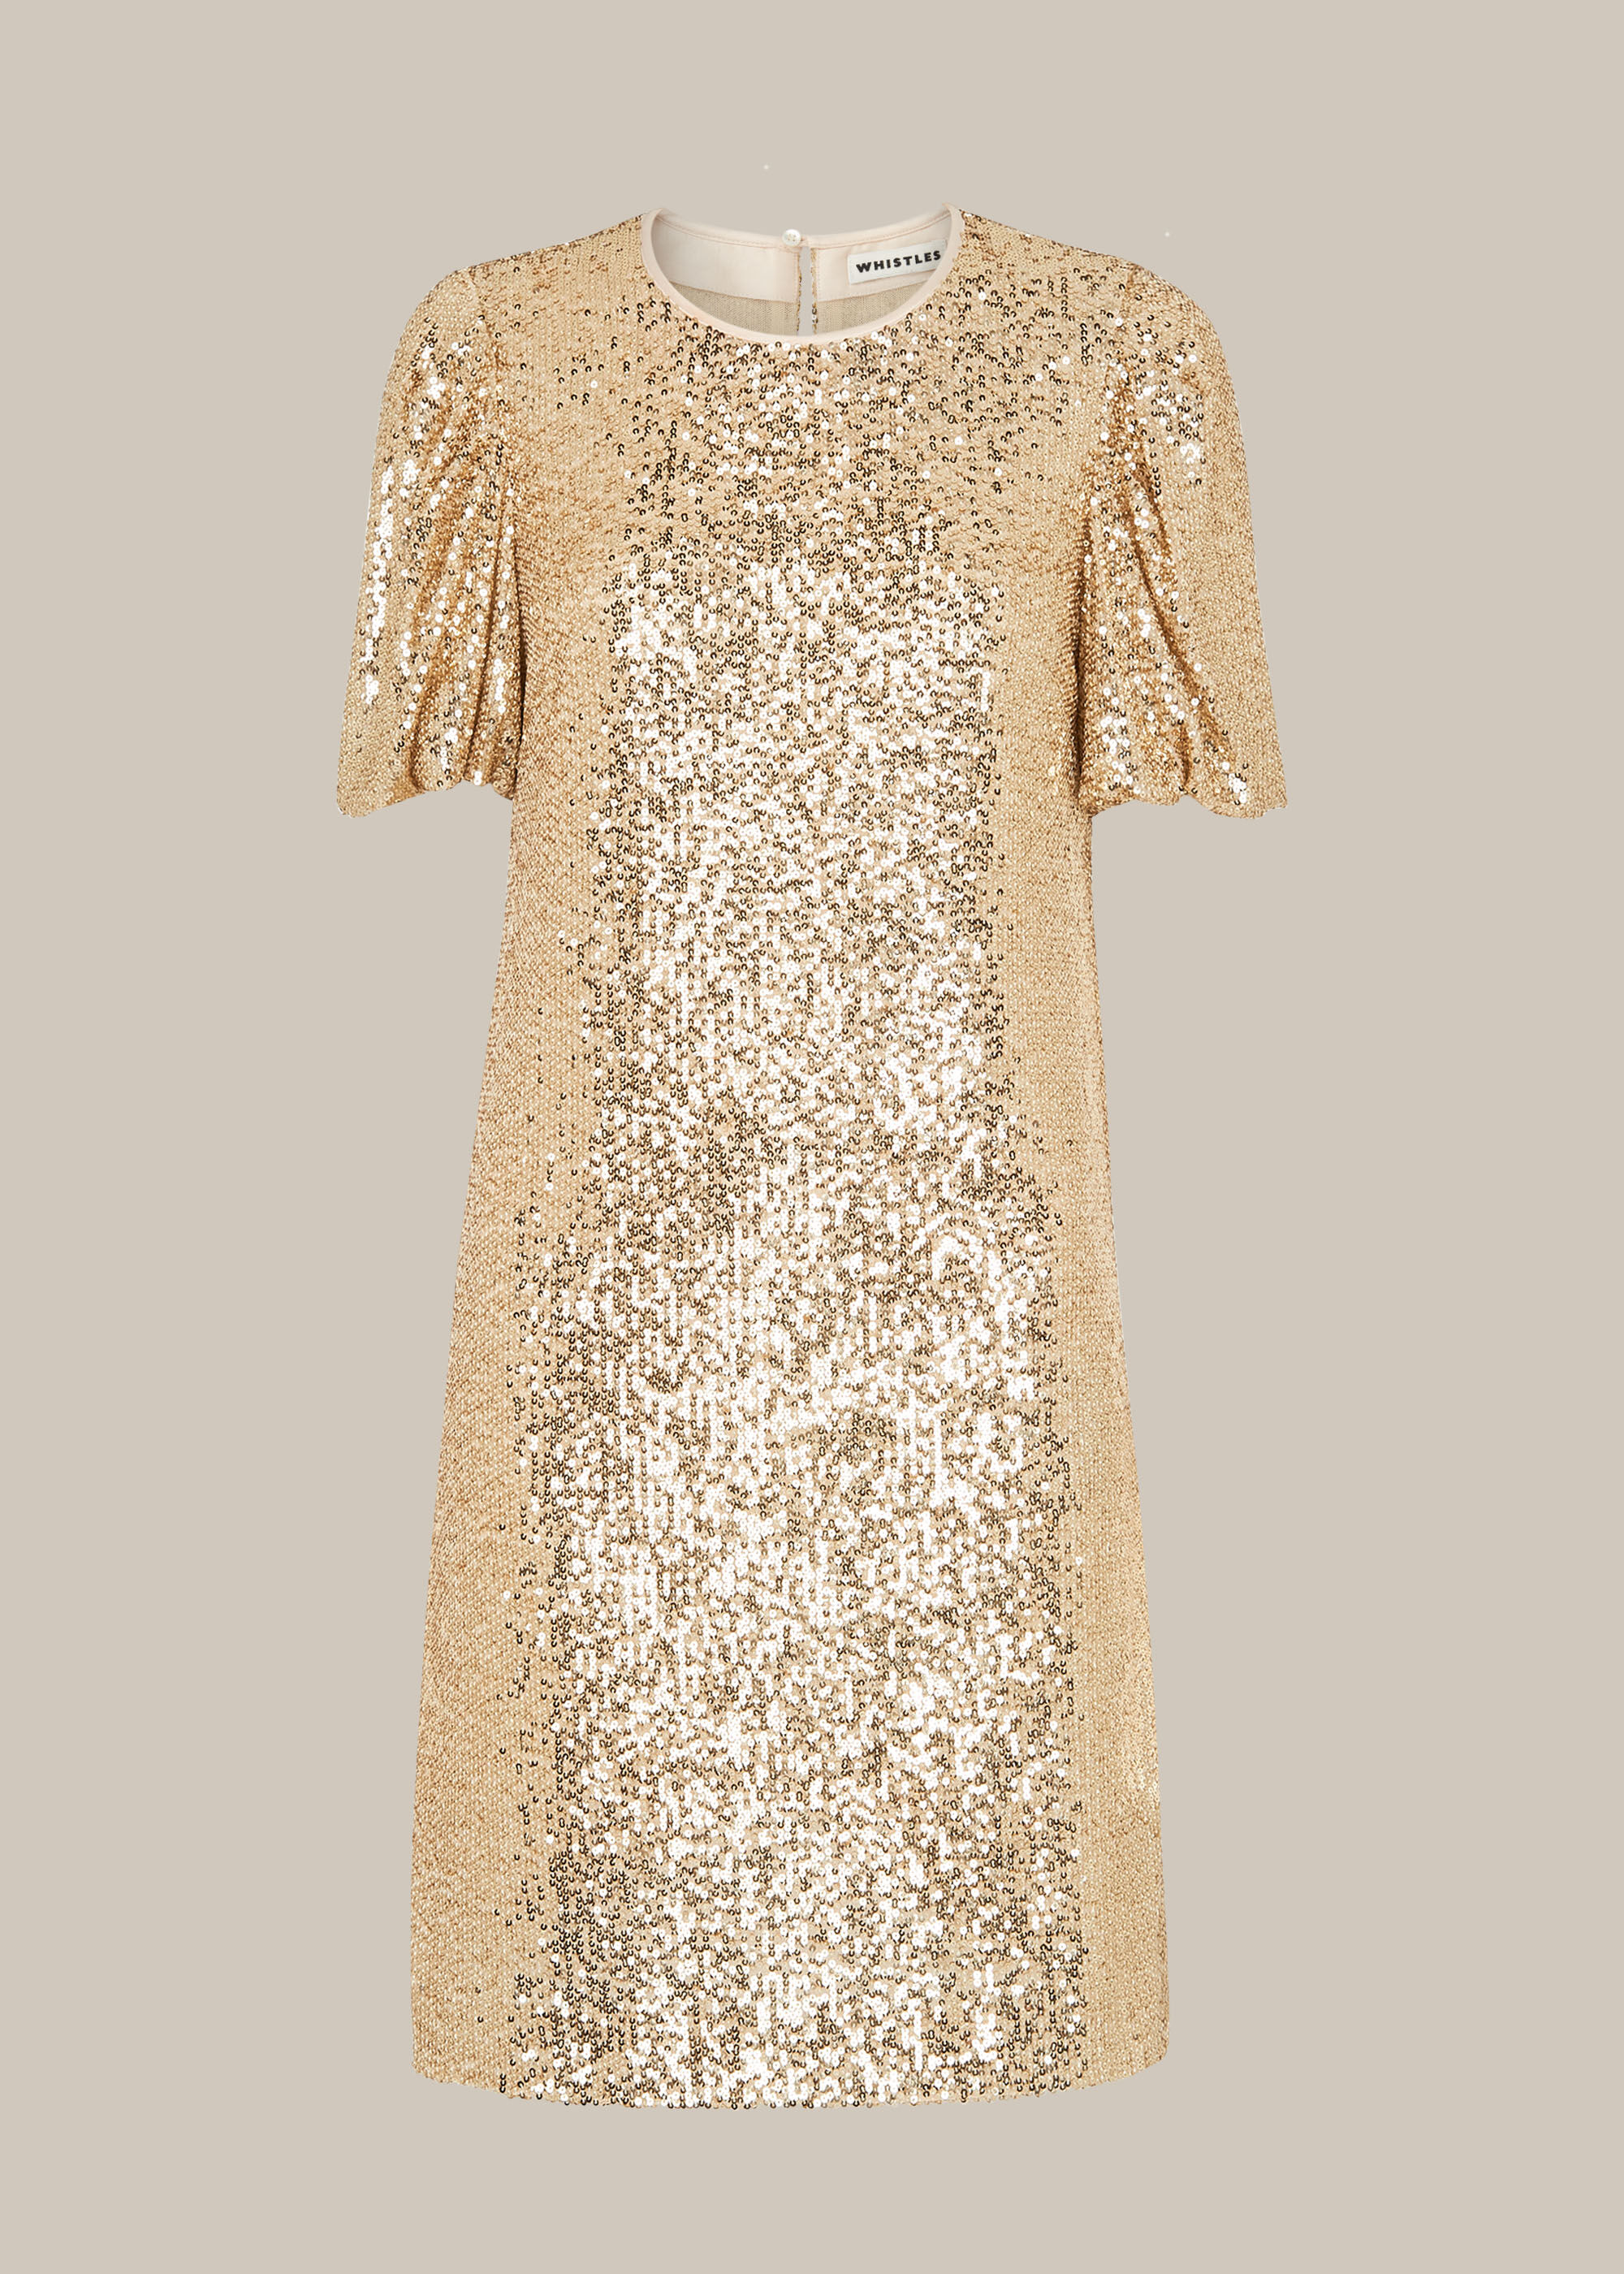 Champagne Sequin Shift Dress | WHISTLES ...